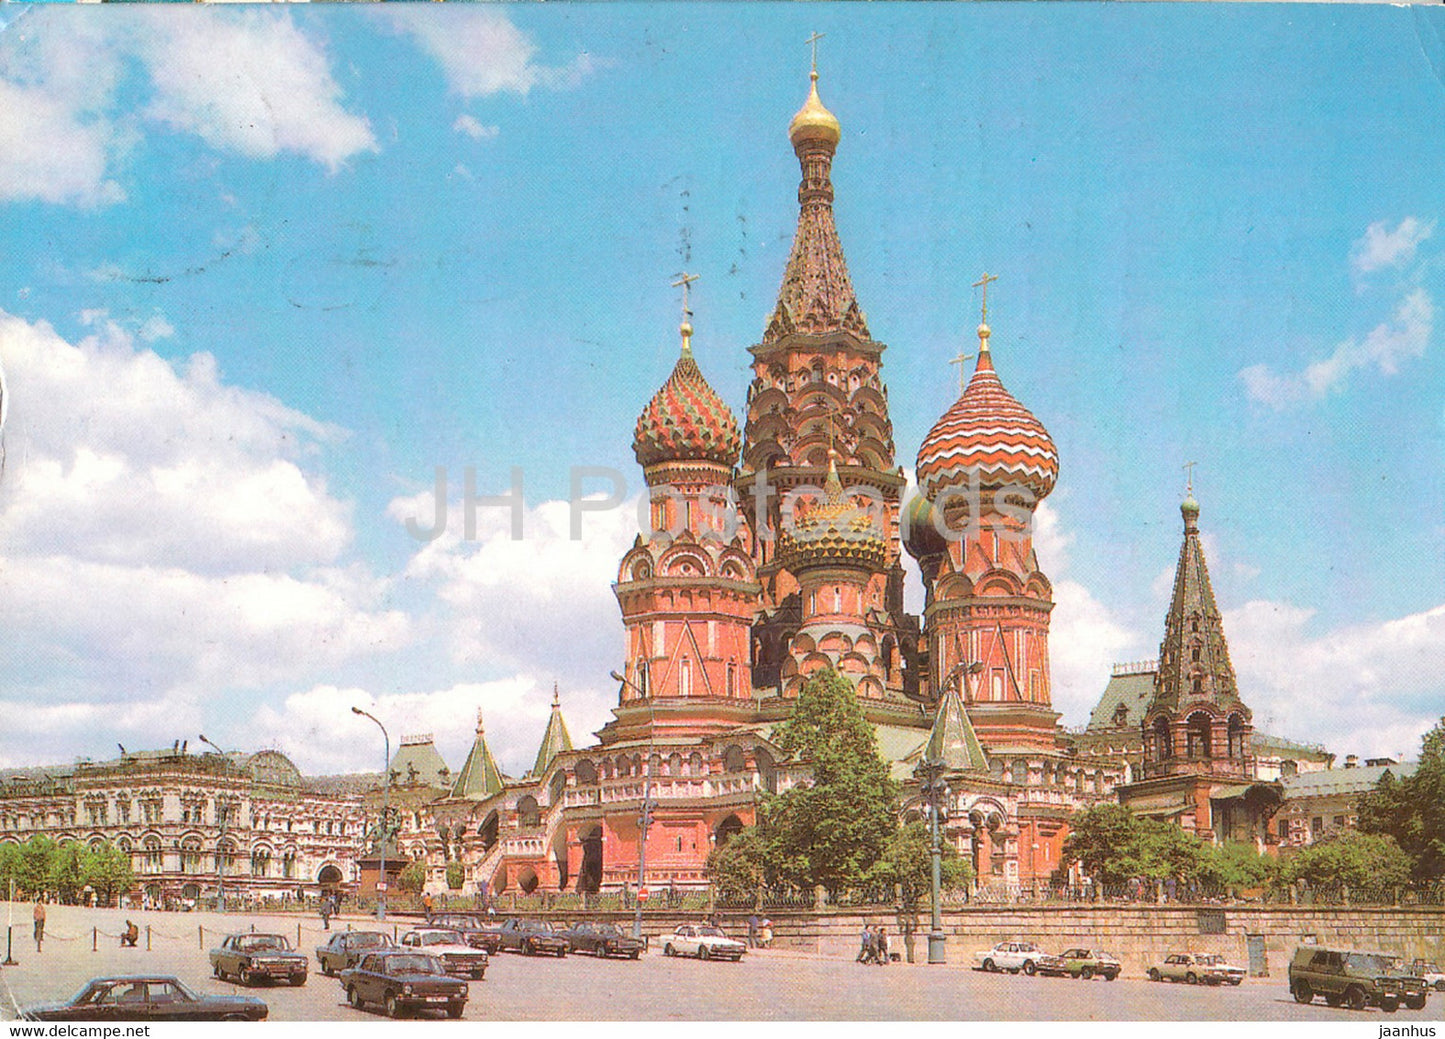 Moscow - Pokrovsky Cathedral - St. Basil's Cathedral - car Volga - 3 - postal stationery - 1986 - Russia USSR - used - JH Postcards